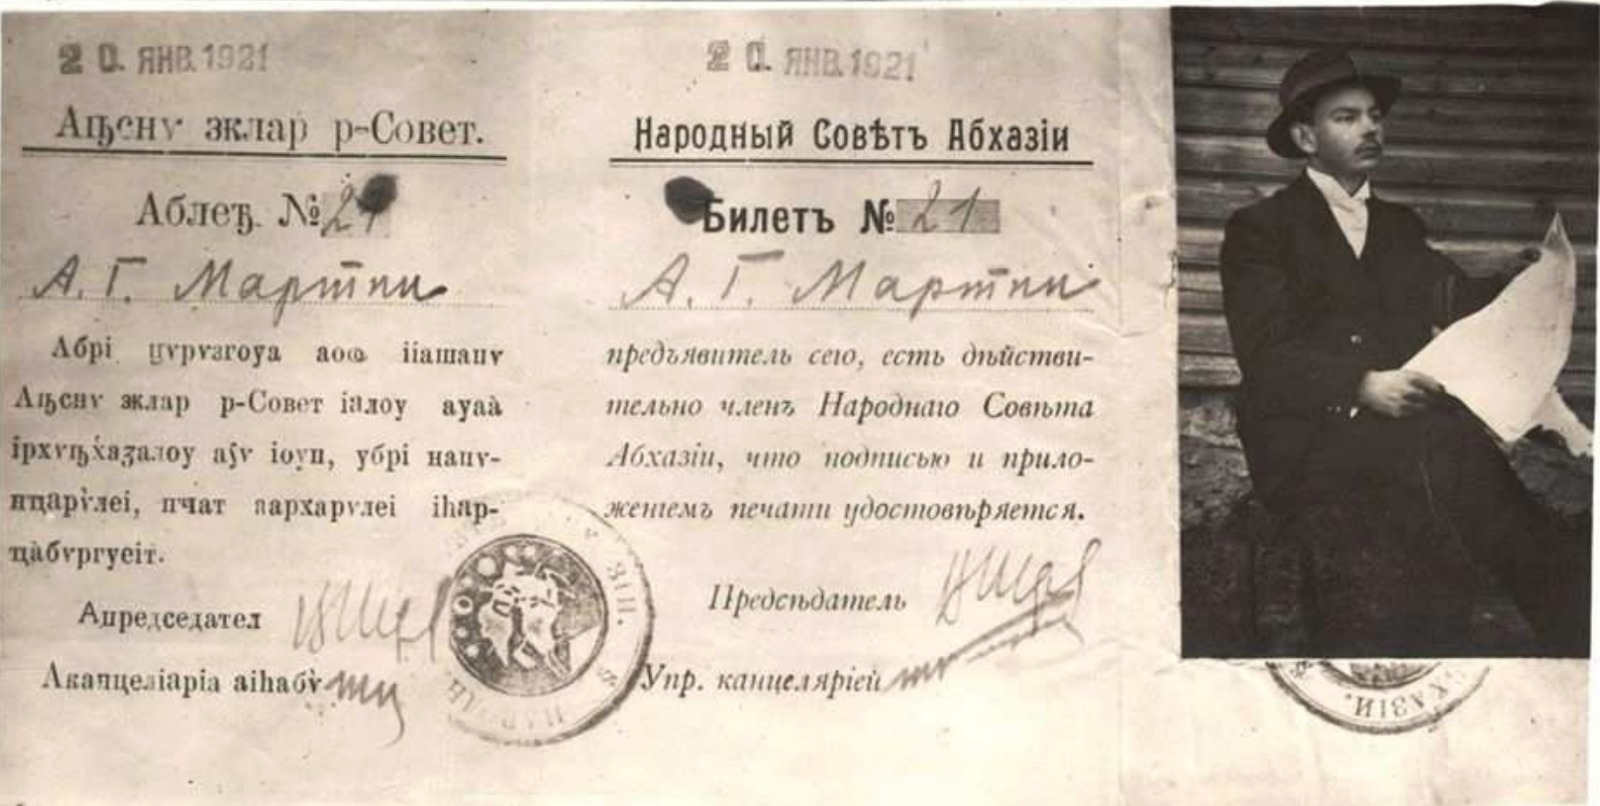 People's Council of Abkhazia A.G. Martin The holder really is a member of the People's Council of Abkhazia, which is authenticated by signature and stamp.